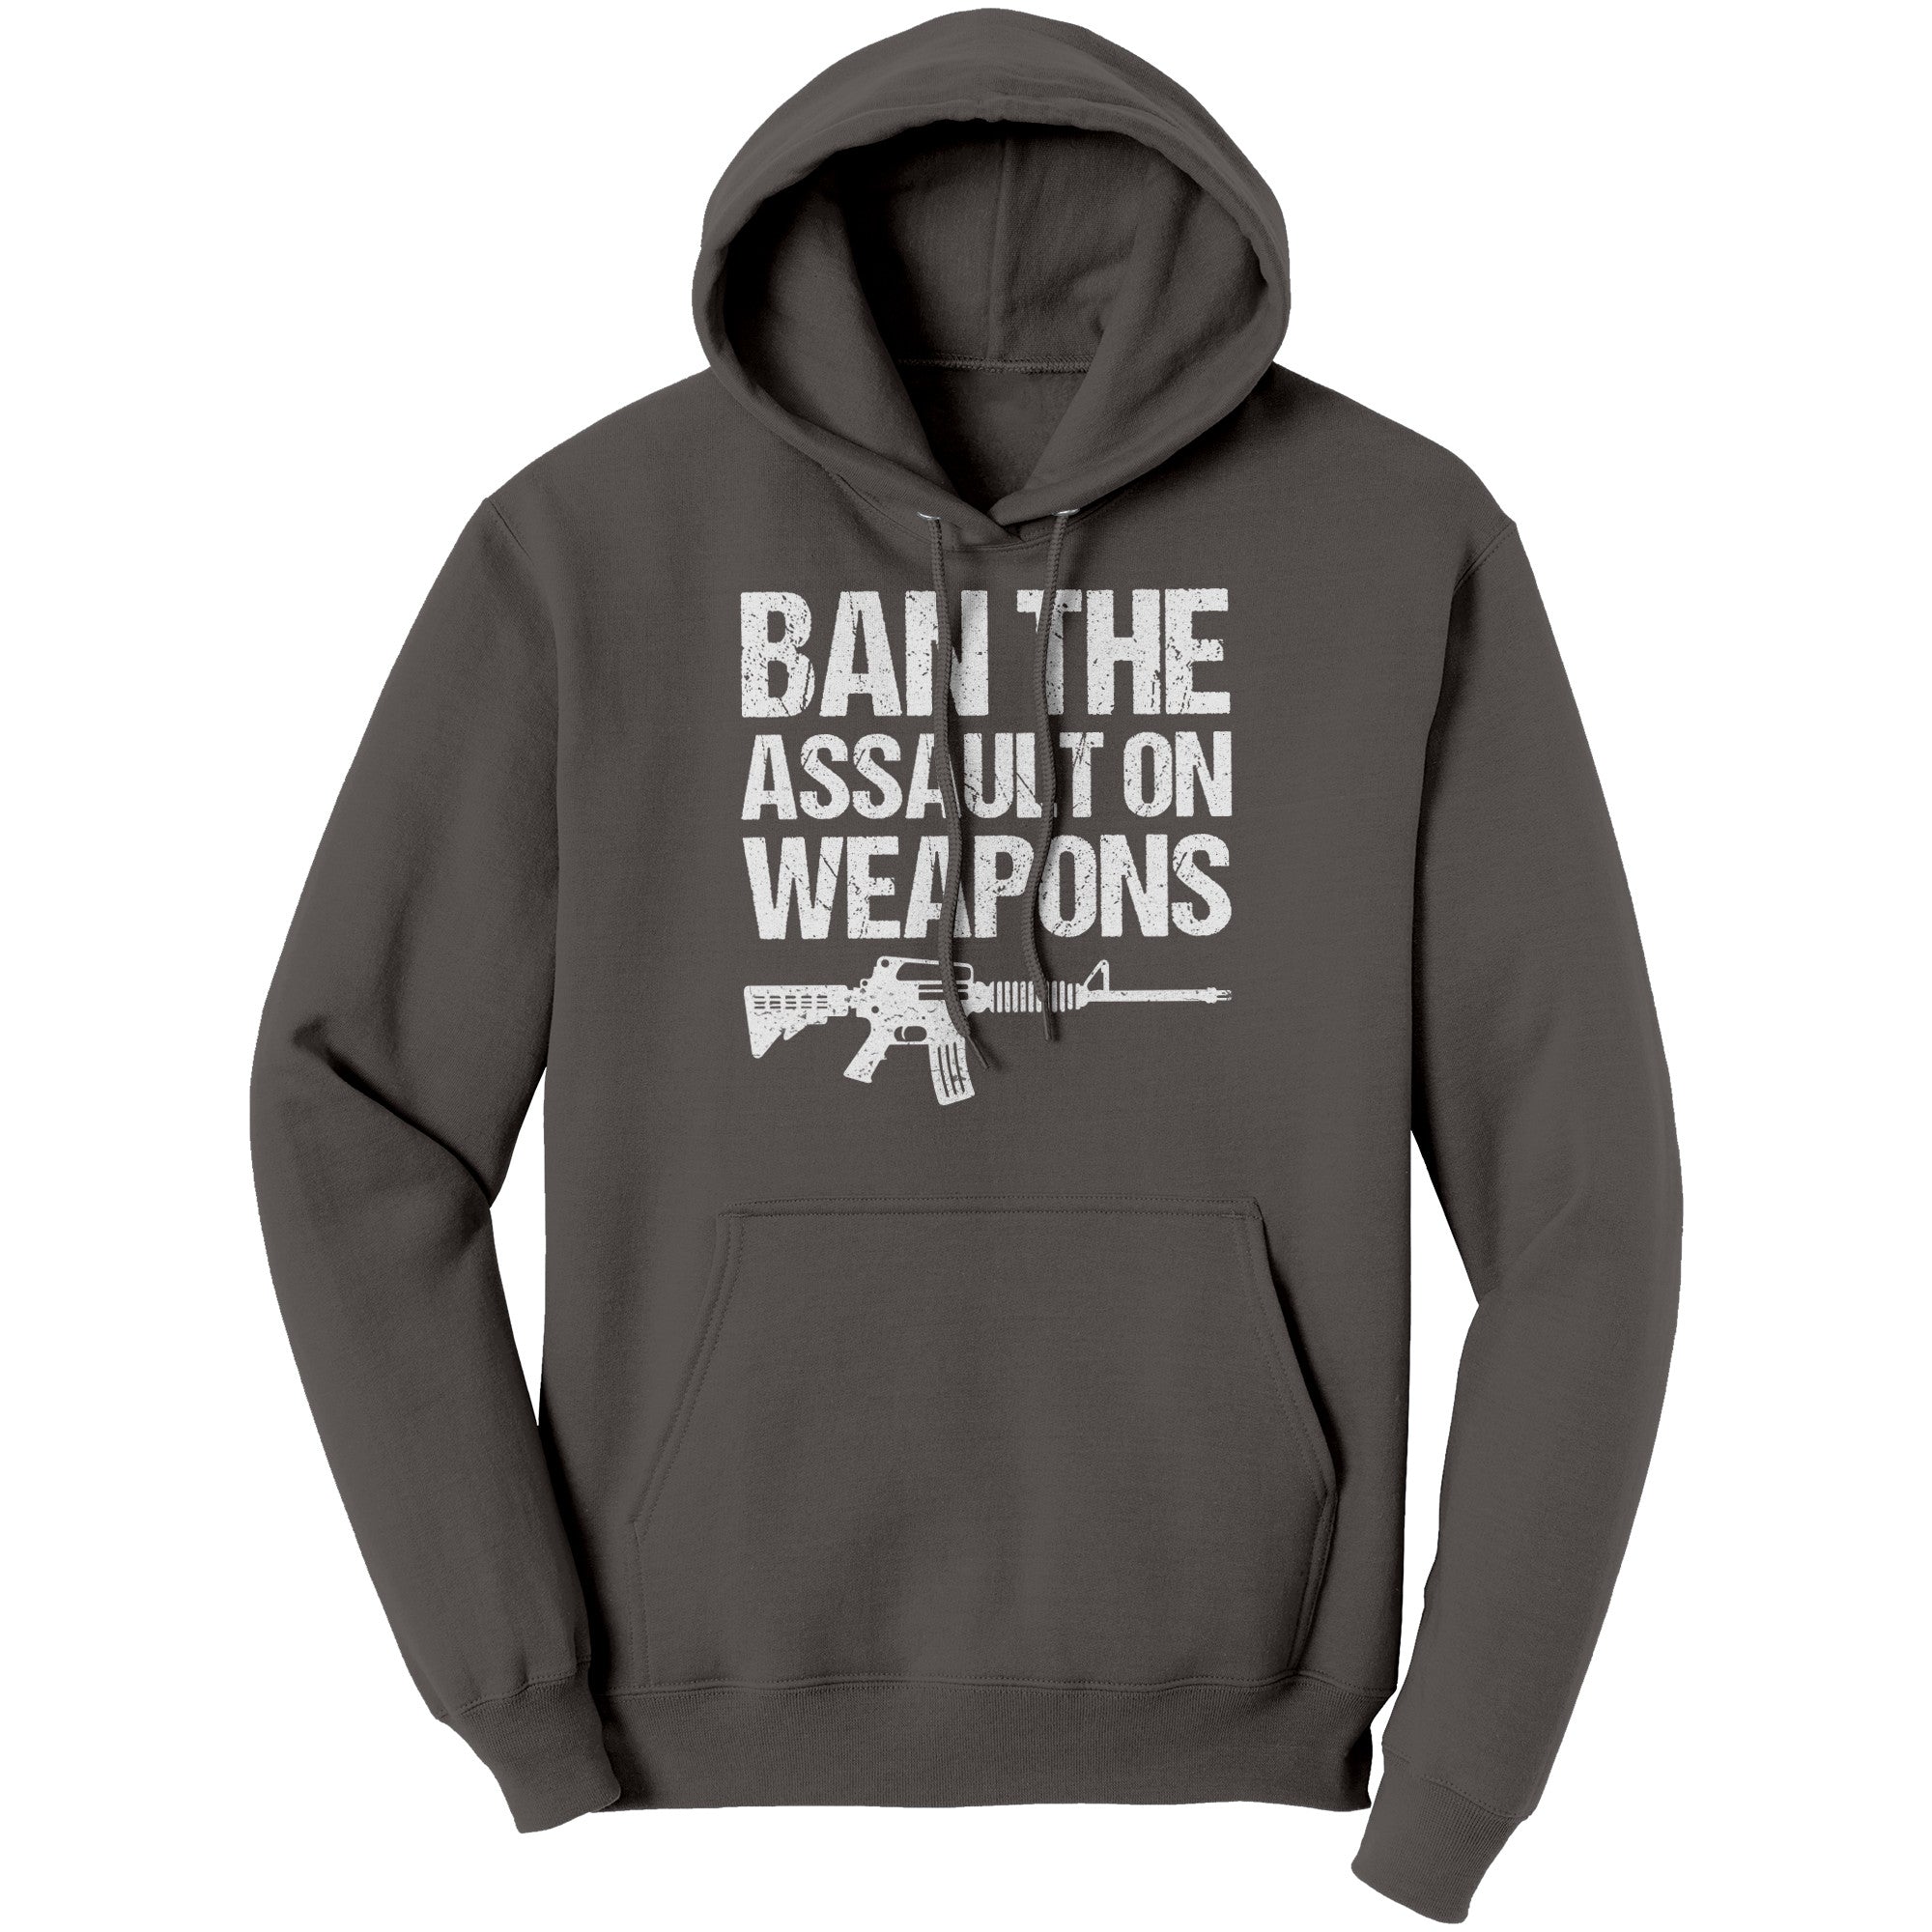 Ban The Assault On Weapons (Ladies) -Apparel | Drunk America 